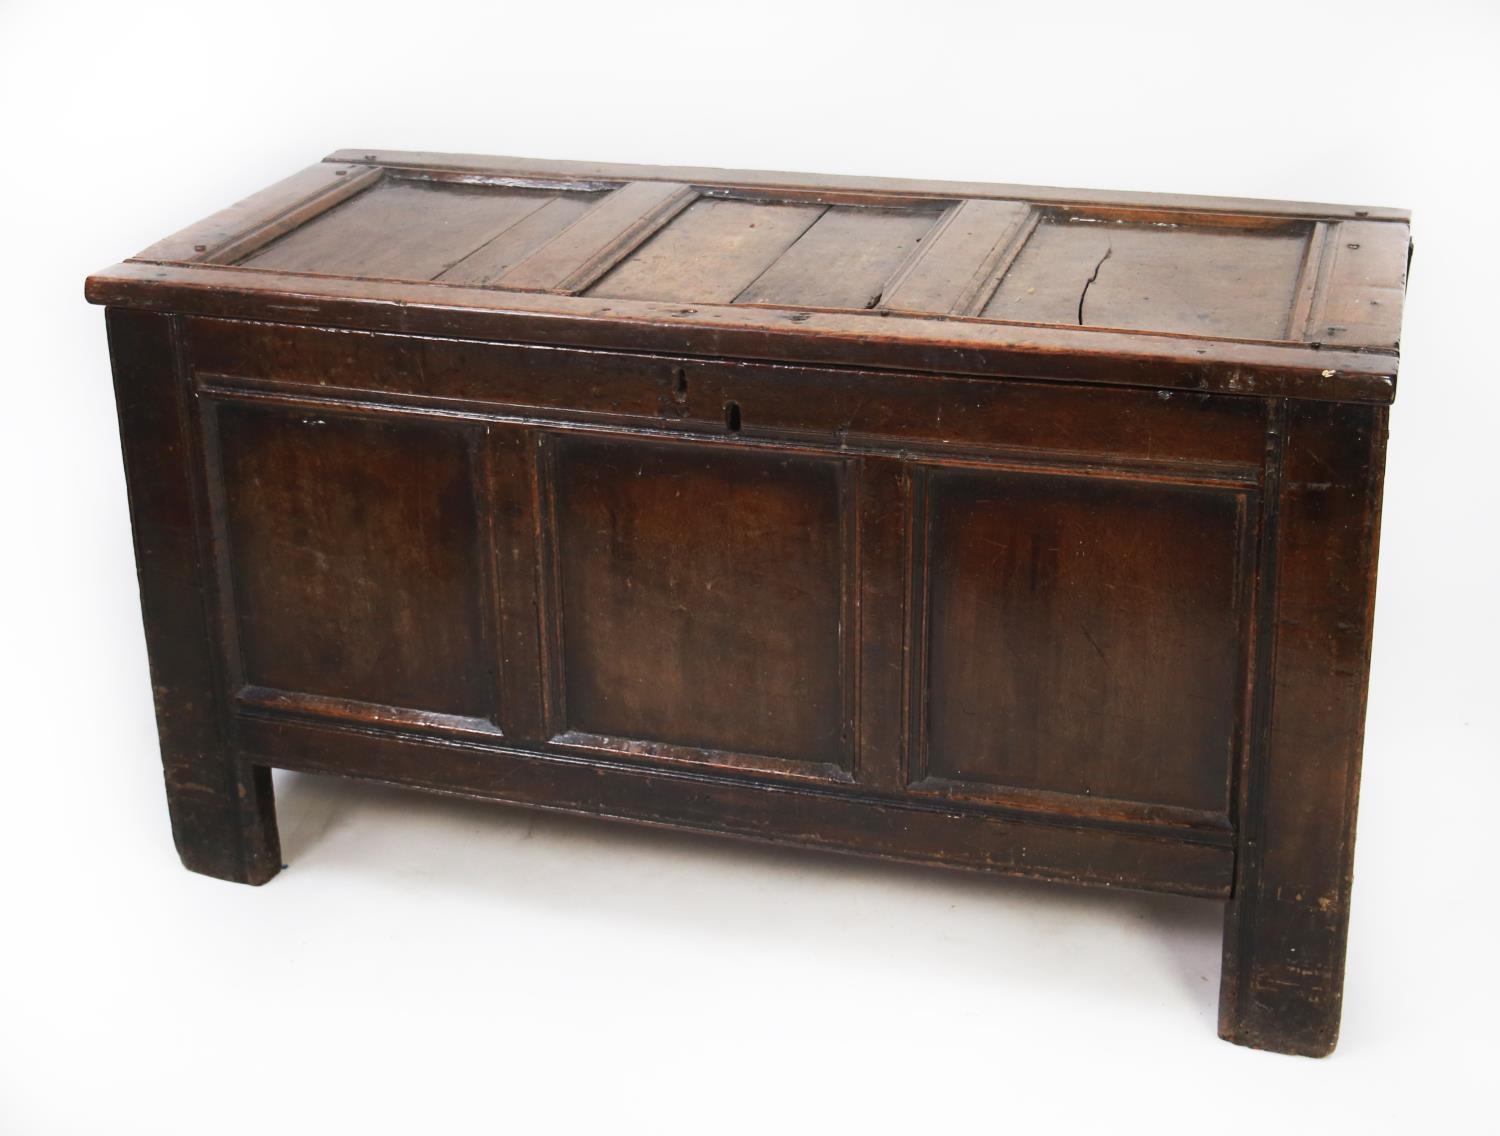 SEVENTEENTH CENTURY OAK COFFER, of typical form with three panelled top and front, 27” (68.6cm)